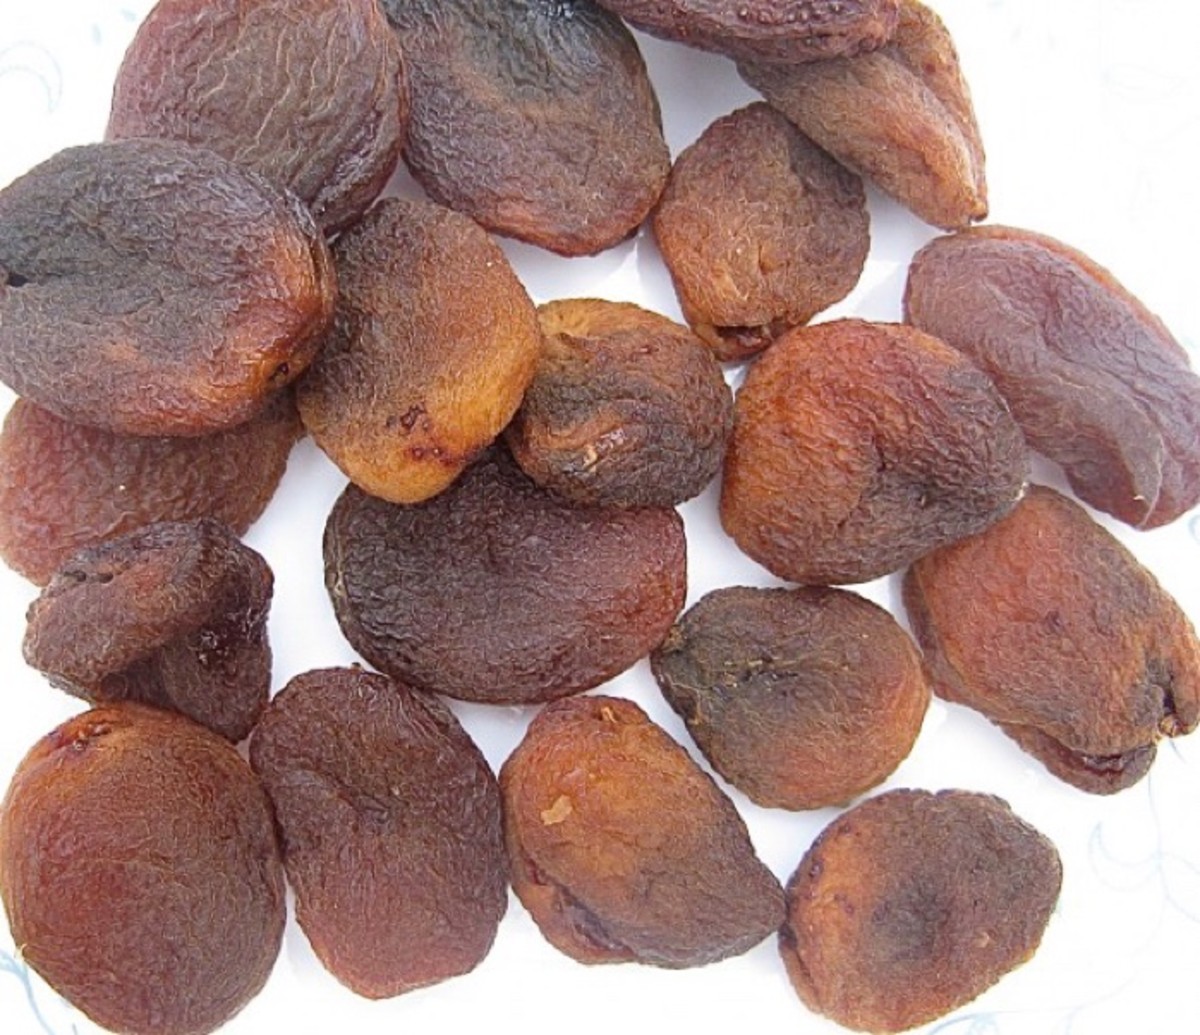 Apricots dried in the sun